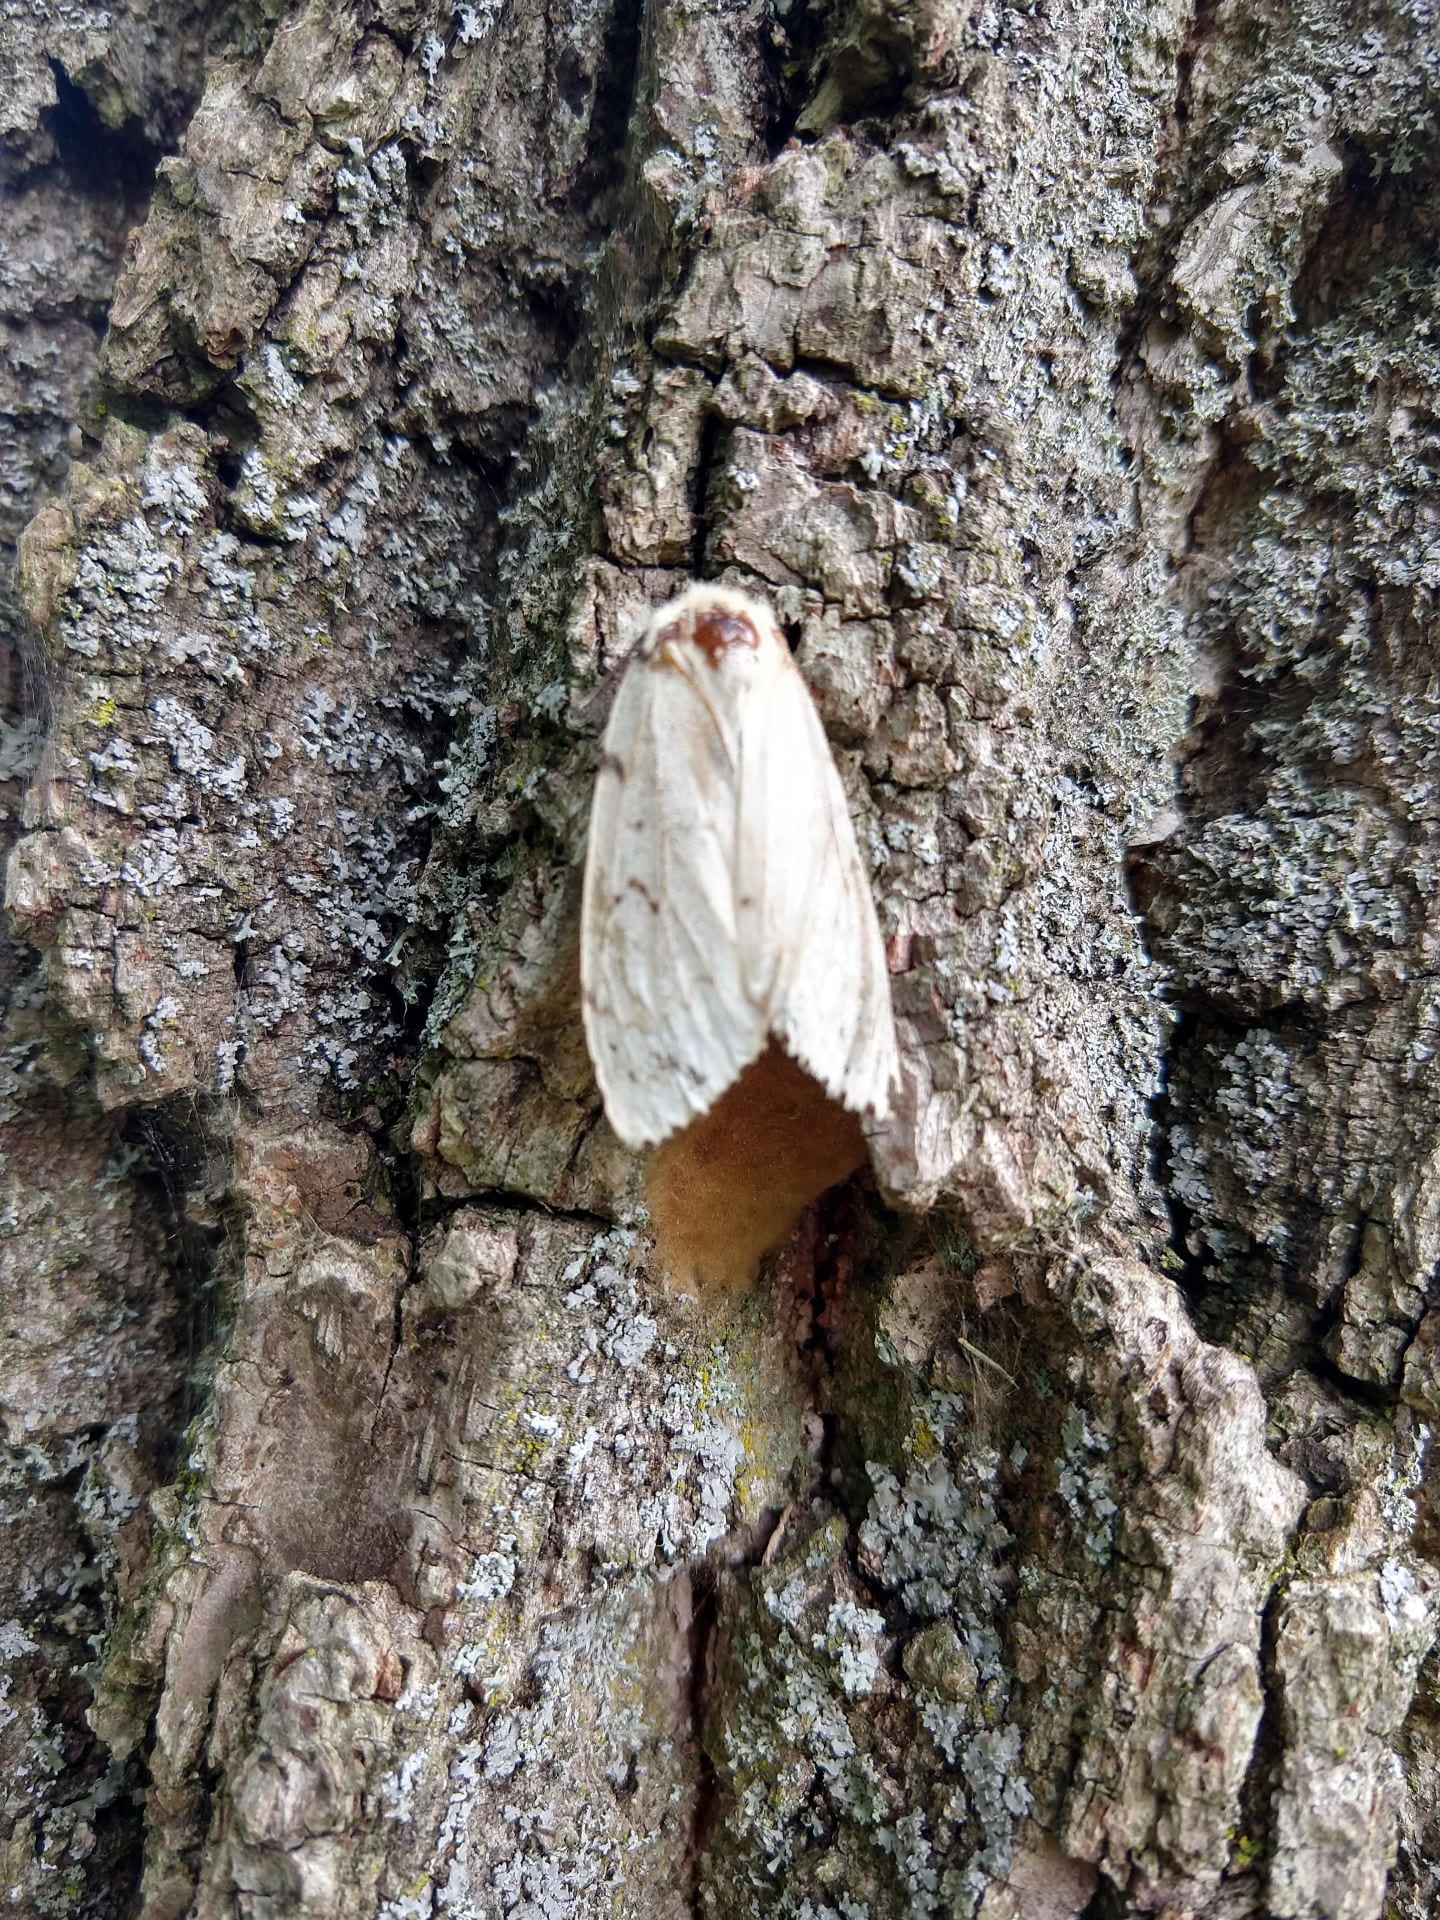 photo is of a female moth with an egg mass on tree bark